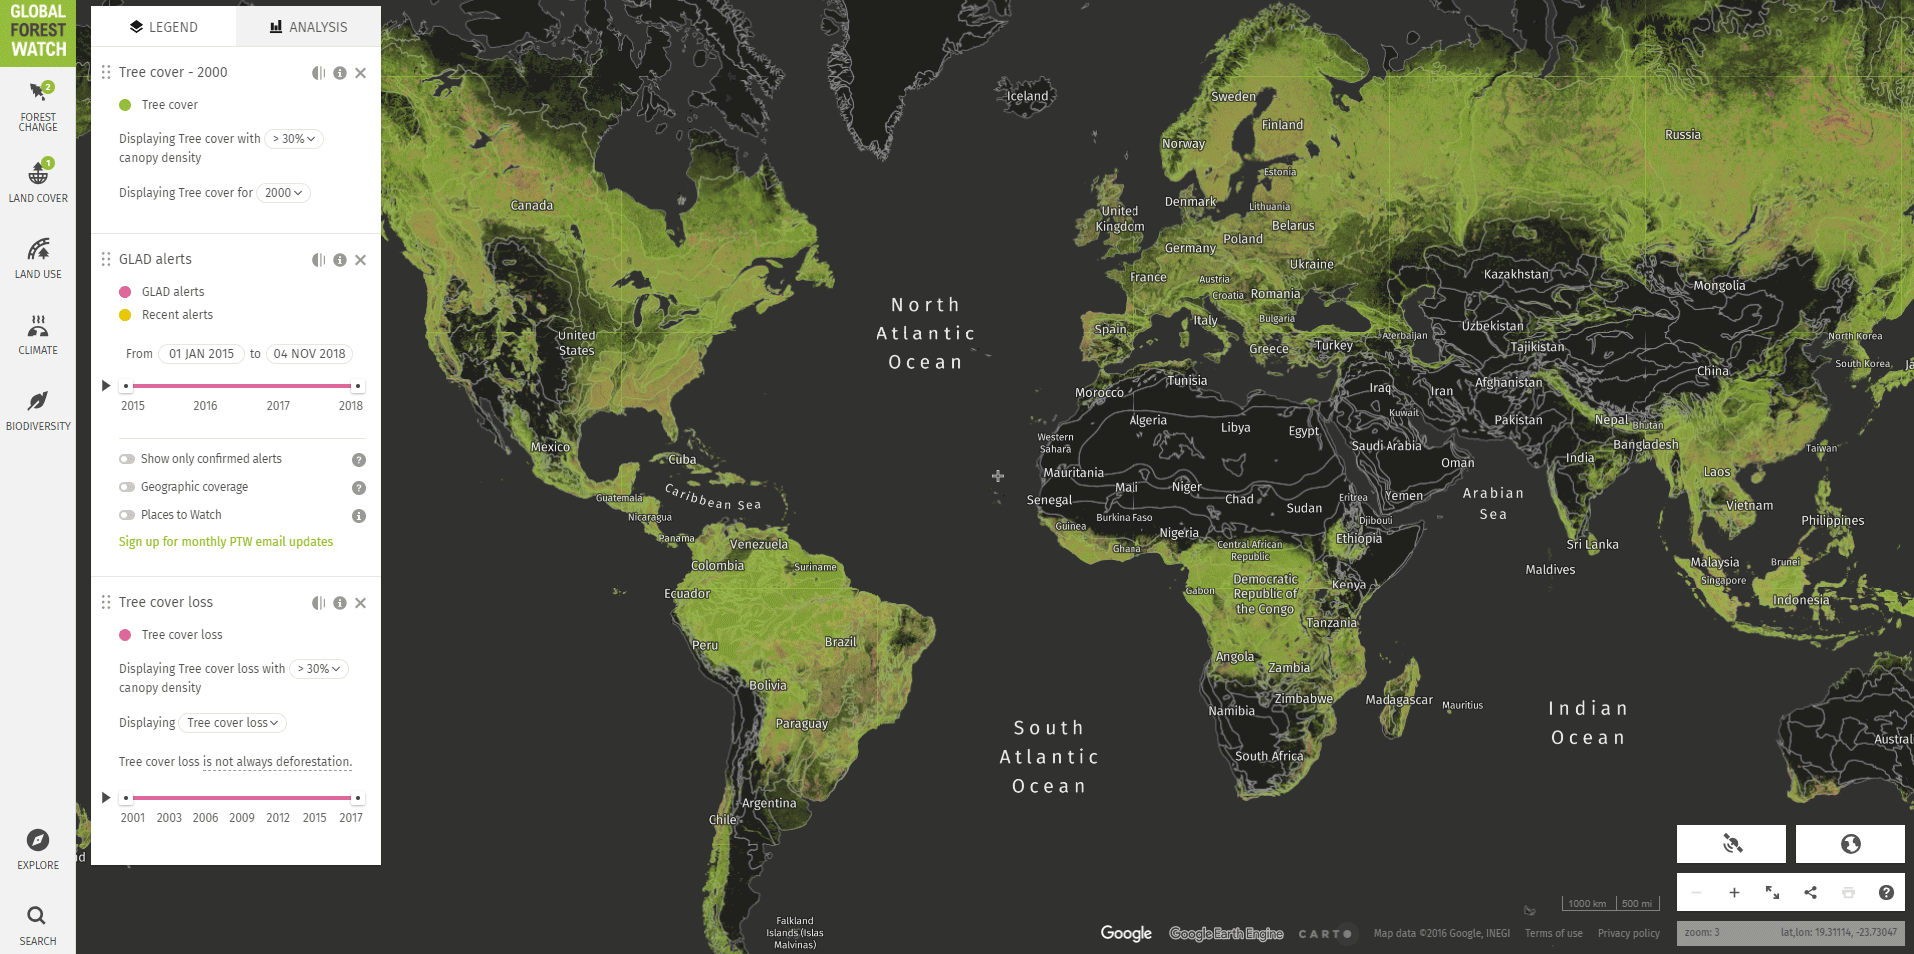 Global Forest coverage